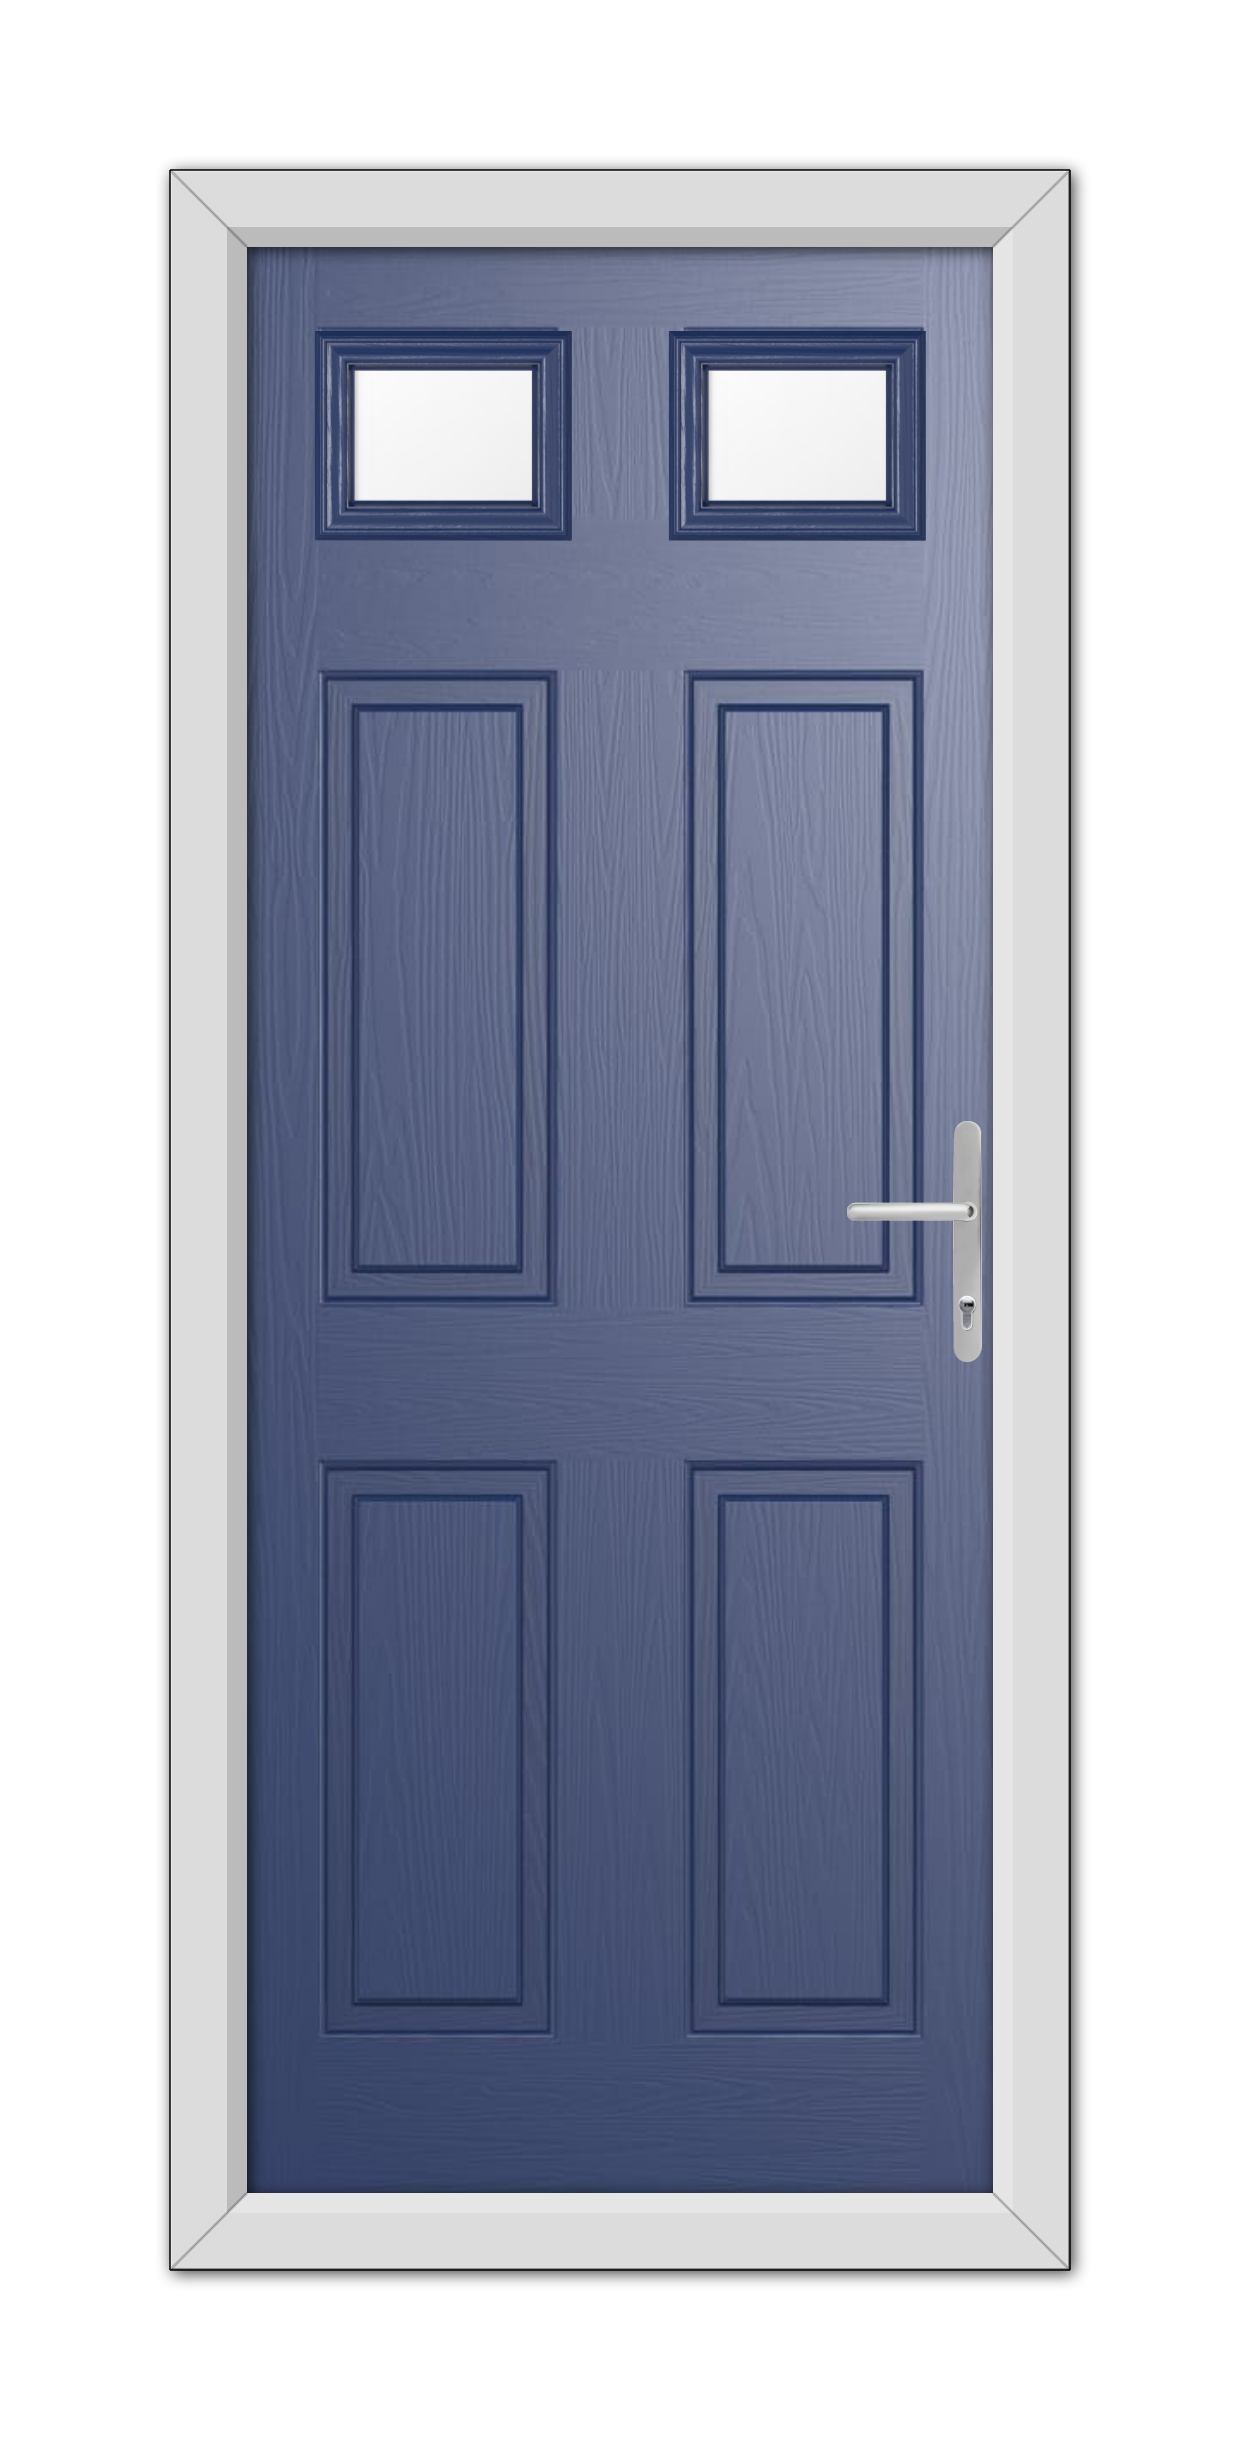 A modern Blue Middleton Glazed 2 Composite Door 48mm Timber Core with four panels and three small rectangular windows, set in a white frame, featuring a silver handle on the right side.